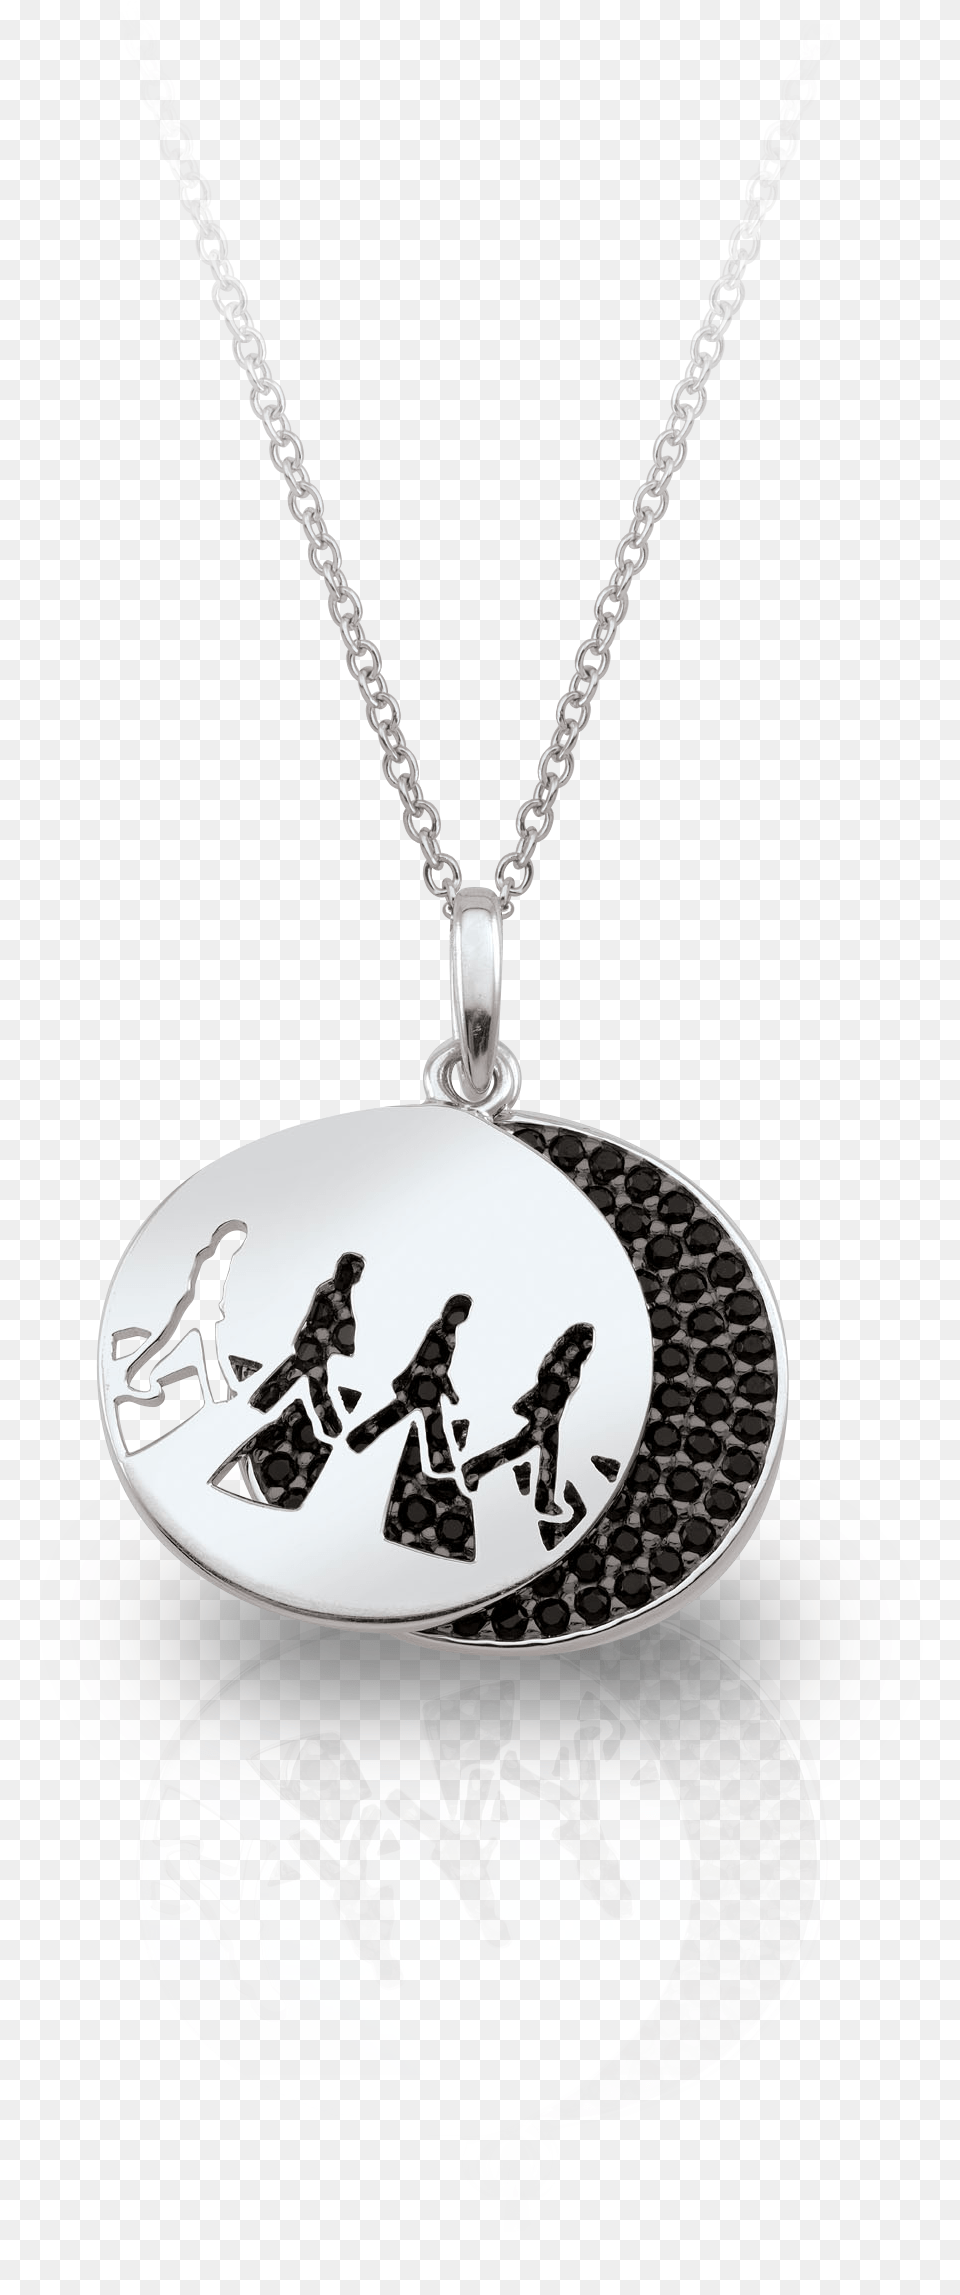 Beatles Abbey Road, Accessories, Jewelry, Necklace, Pendant Png Image